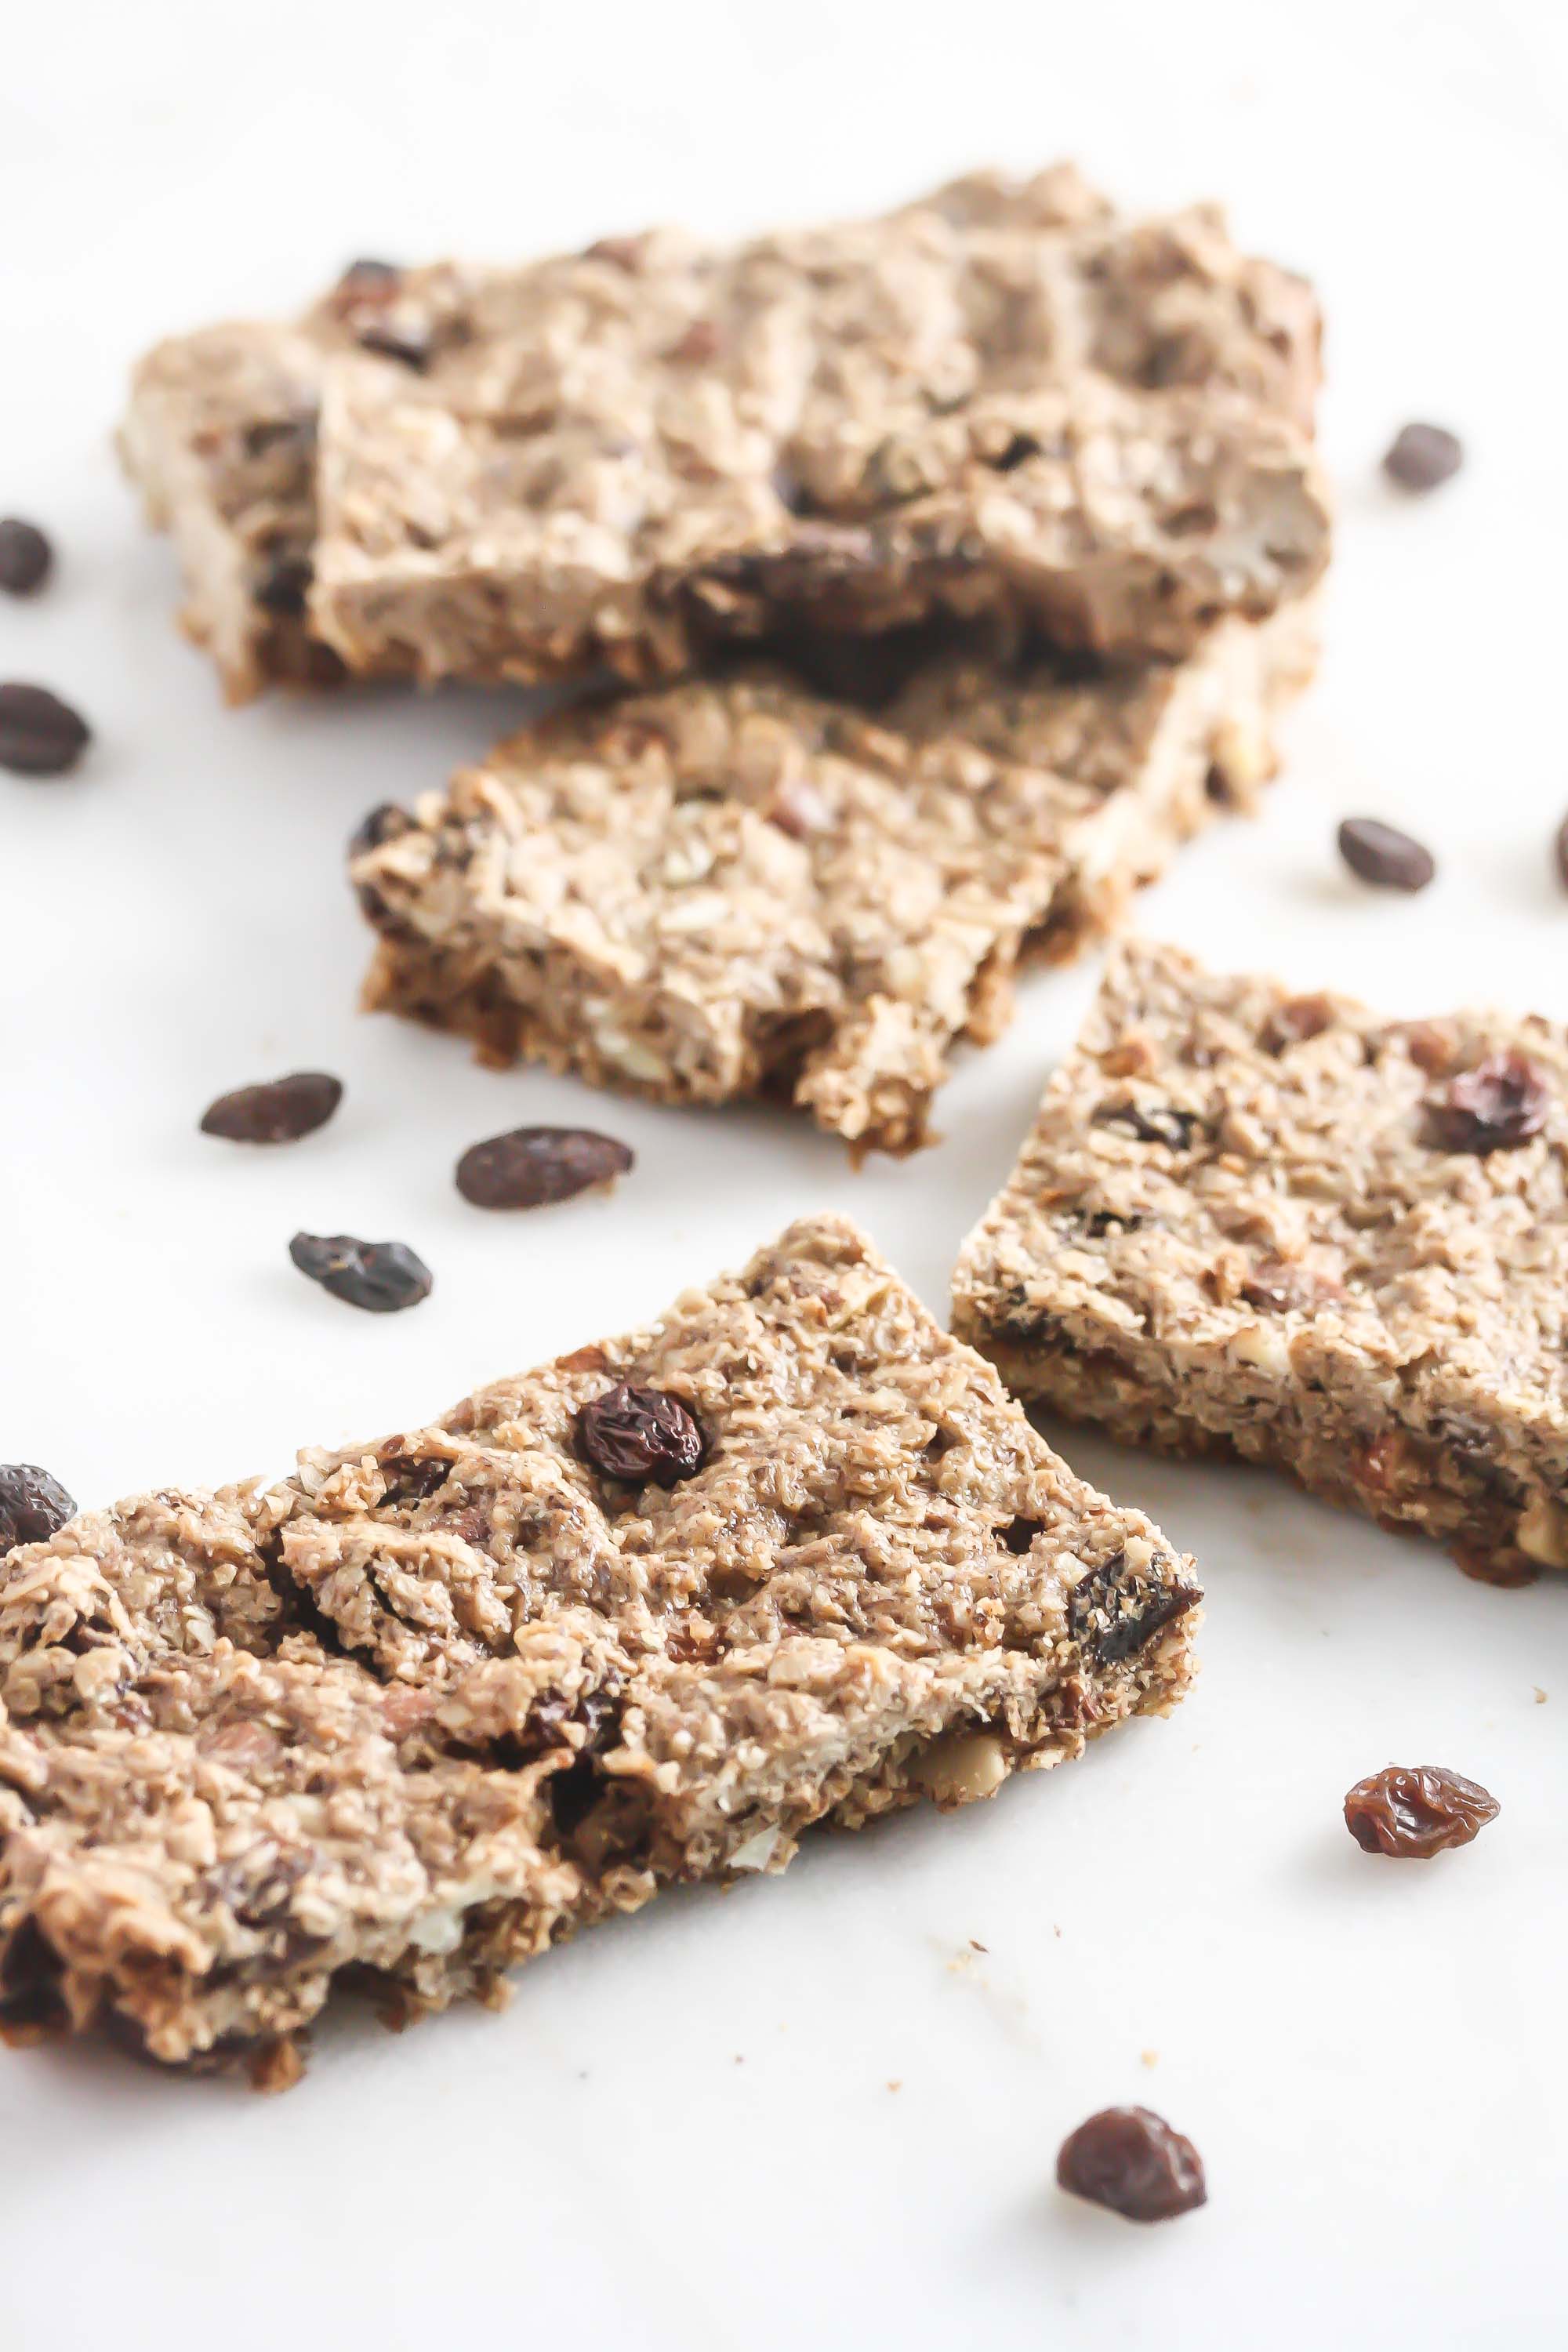 These Almond Oatmeal Raisin Bars are the perfect healthy snack for kids and adults! #glutenfree www.laurenkellynutrition.com